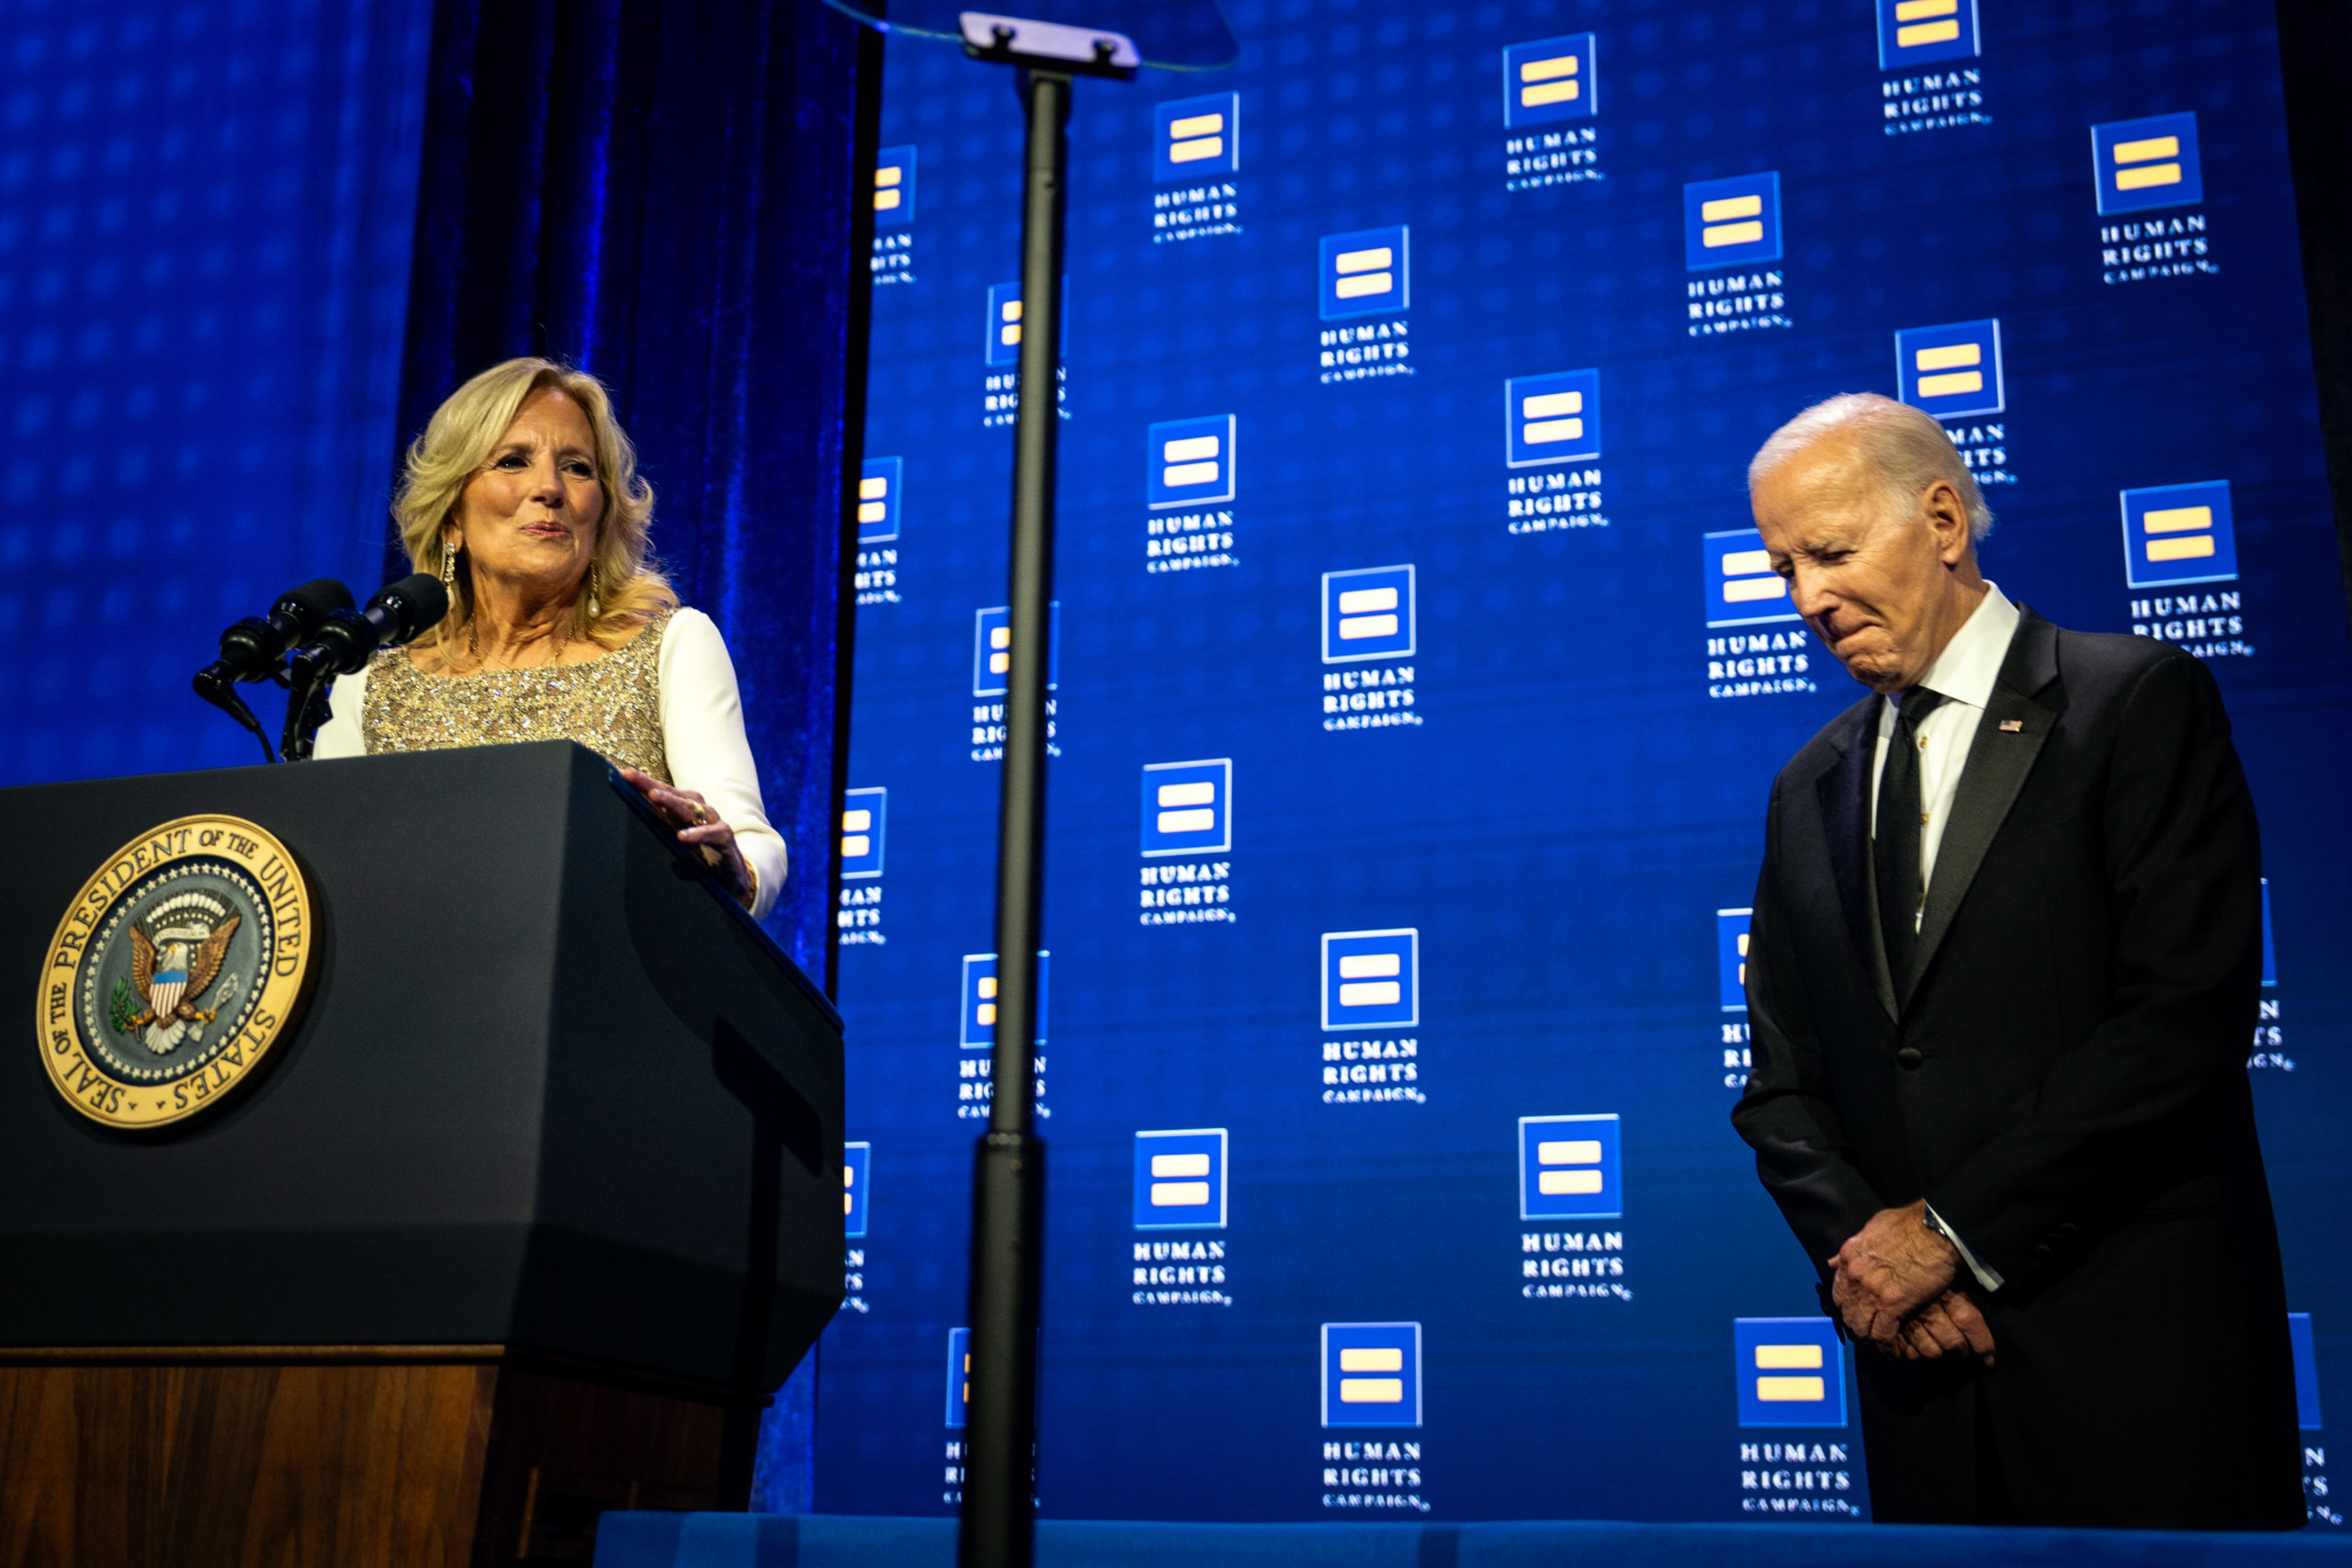 US President Joe Biden listens as First Lady Jill Biden delivers remarks during the 2023 Human Rights Campaign National Dinner at the Washington Convention Center on October, 14, 2023 in Washington, DC. (Photo by Kent Nishimura/Getty Images)